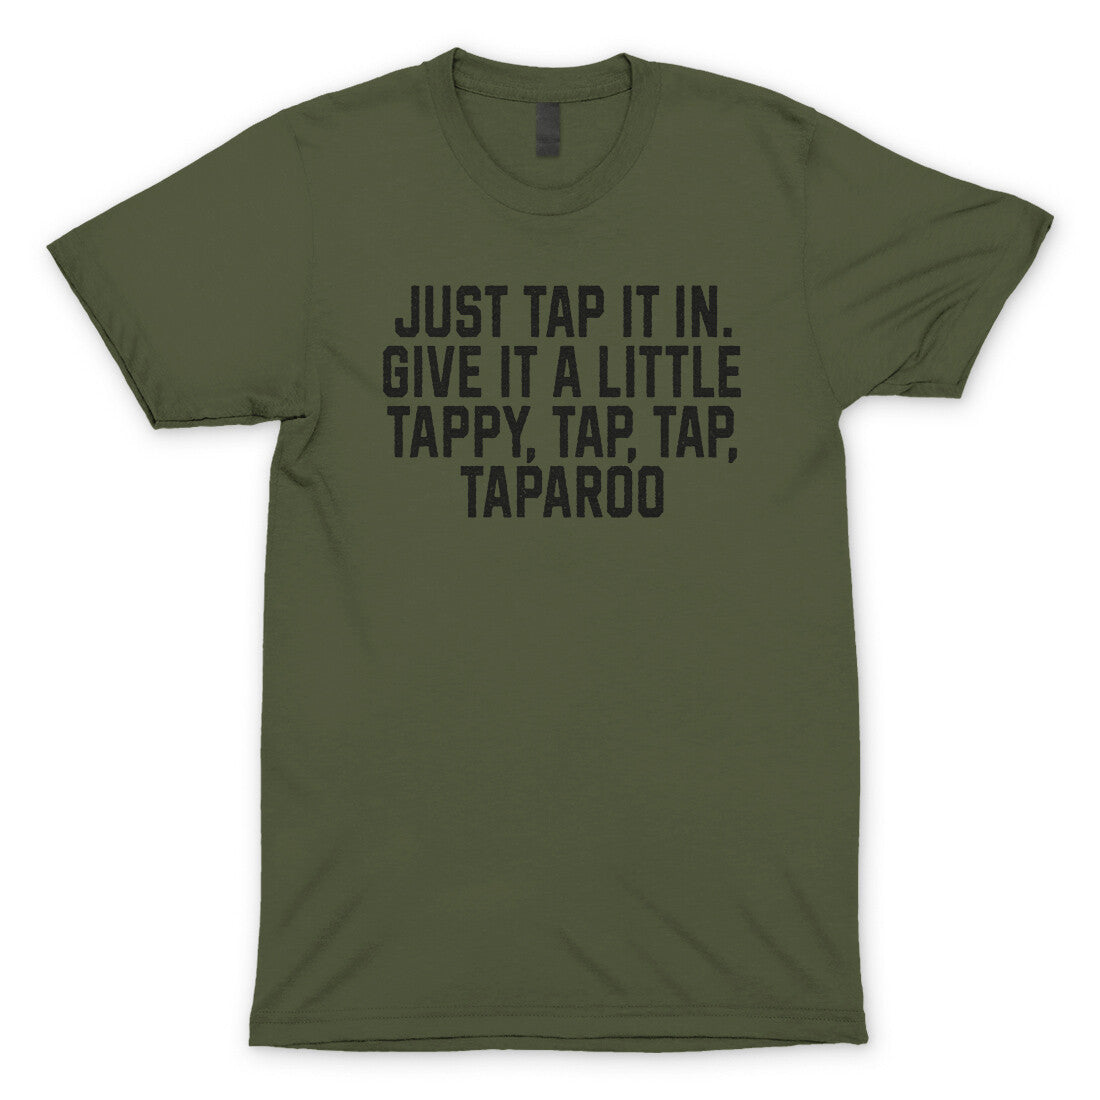 Just Tap it in Give it a Little Tappy Tap Tap Taparoo in Military Green Color